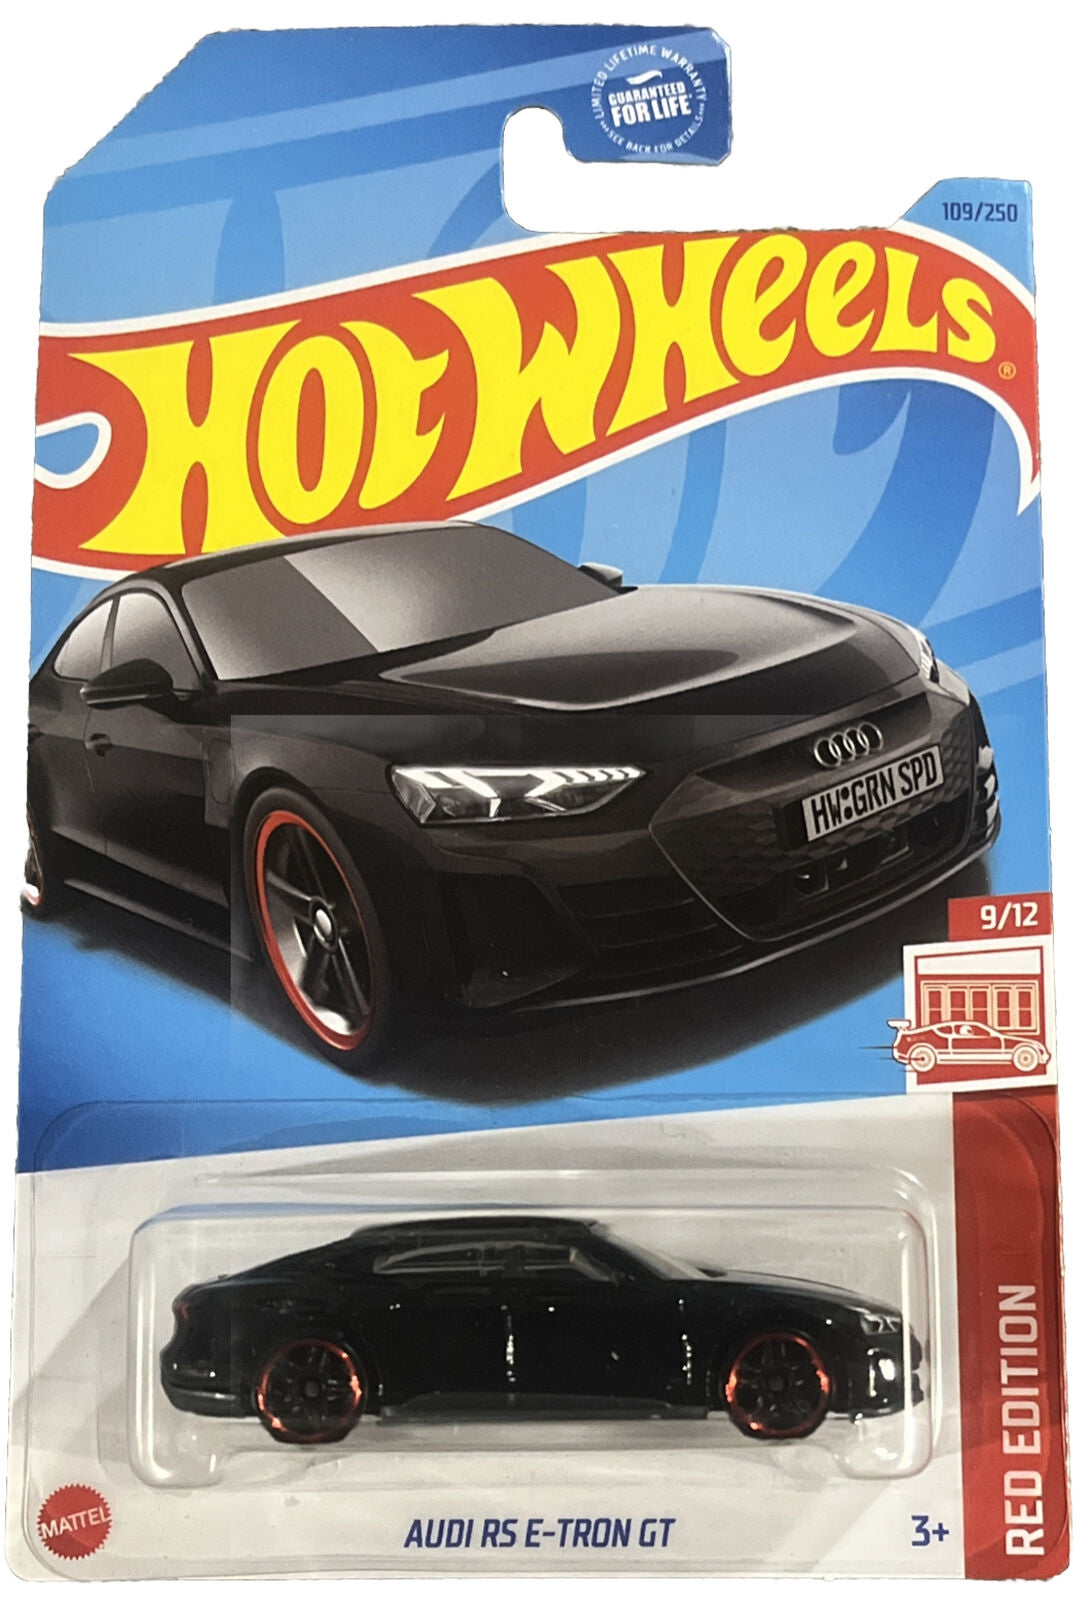 Hot Wheels Audi RS e-tron GT HW Red Edition HKL59 - Target Exclusive